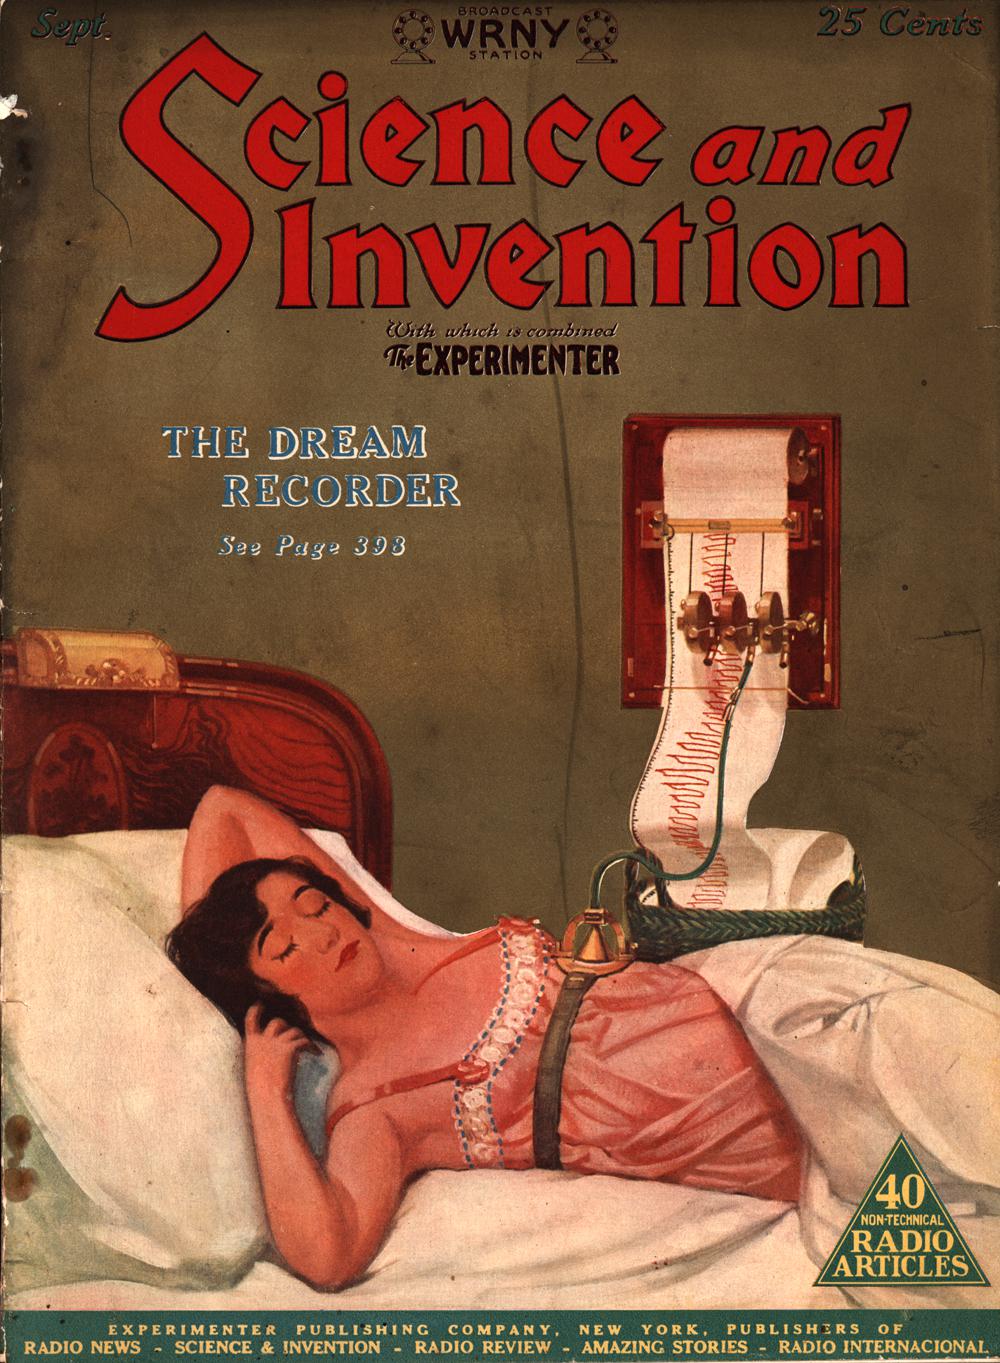 1926 - Science and invention - Vol. 14, No. 5